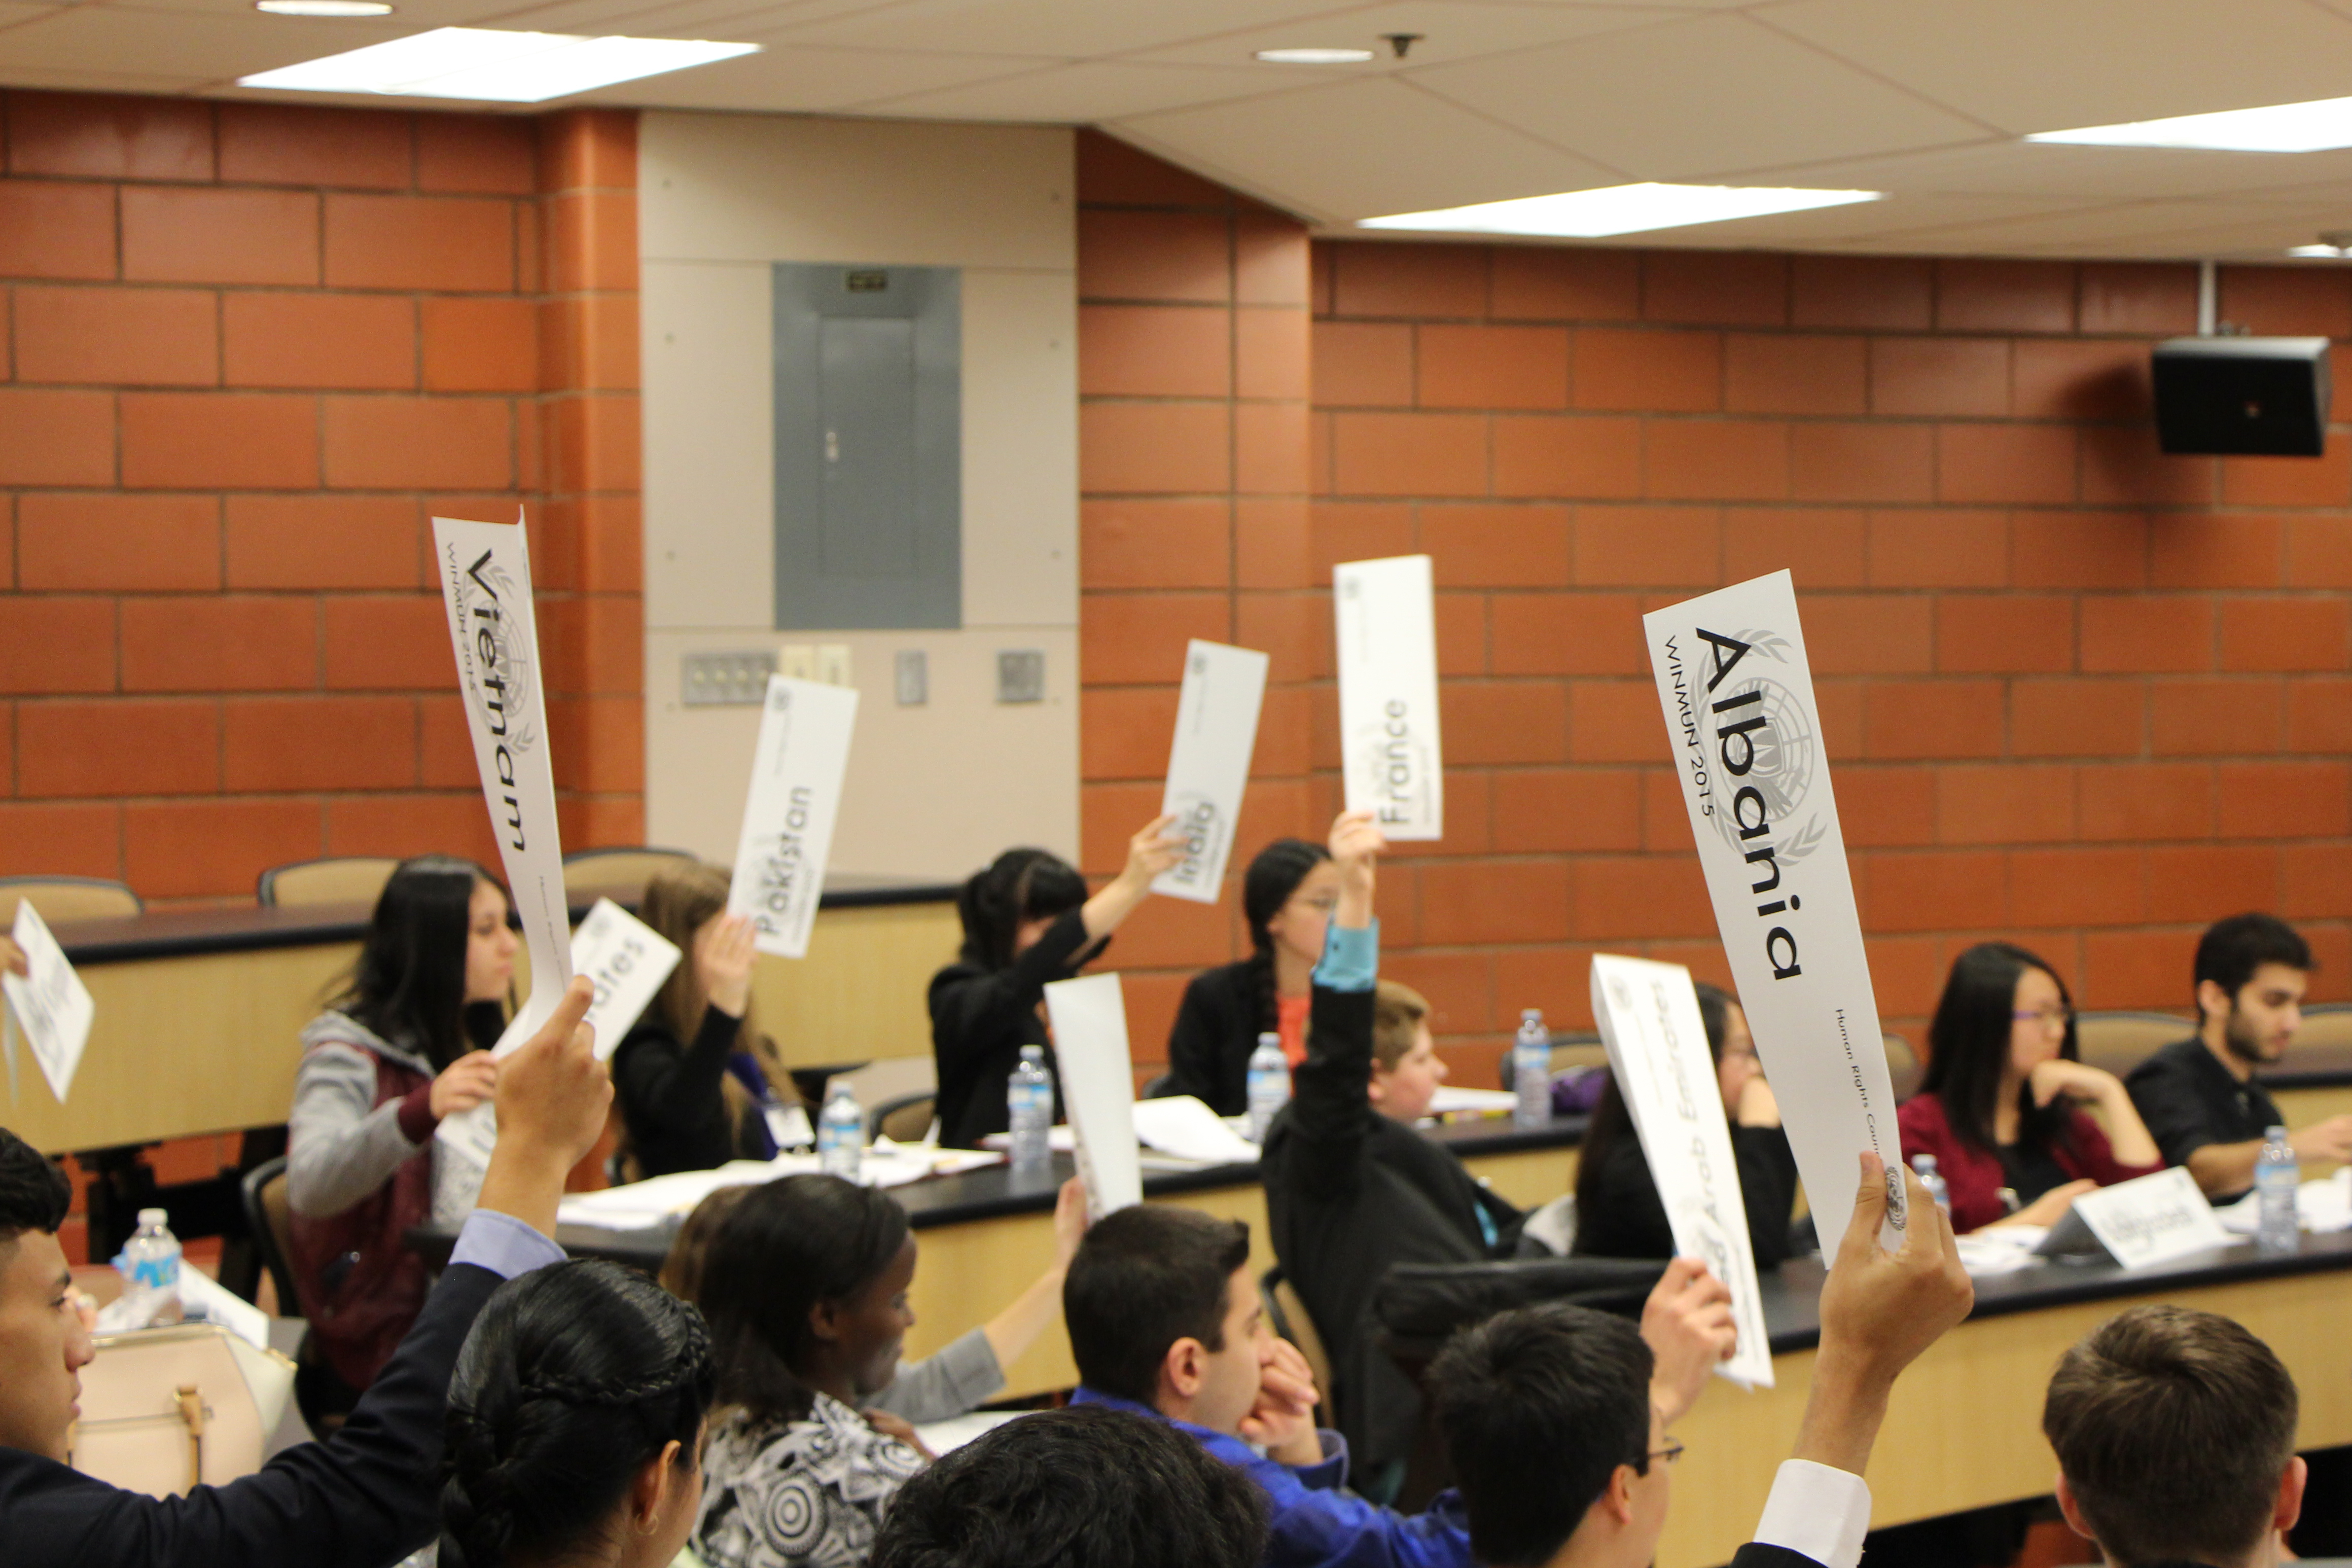 Students engaged in debates on global issues during a model UN conference organized by the University of Windsor Model United Nations Club (WINMUN) and the Political Science department.